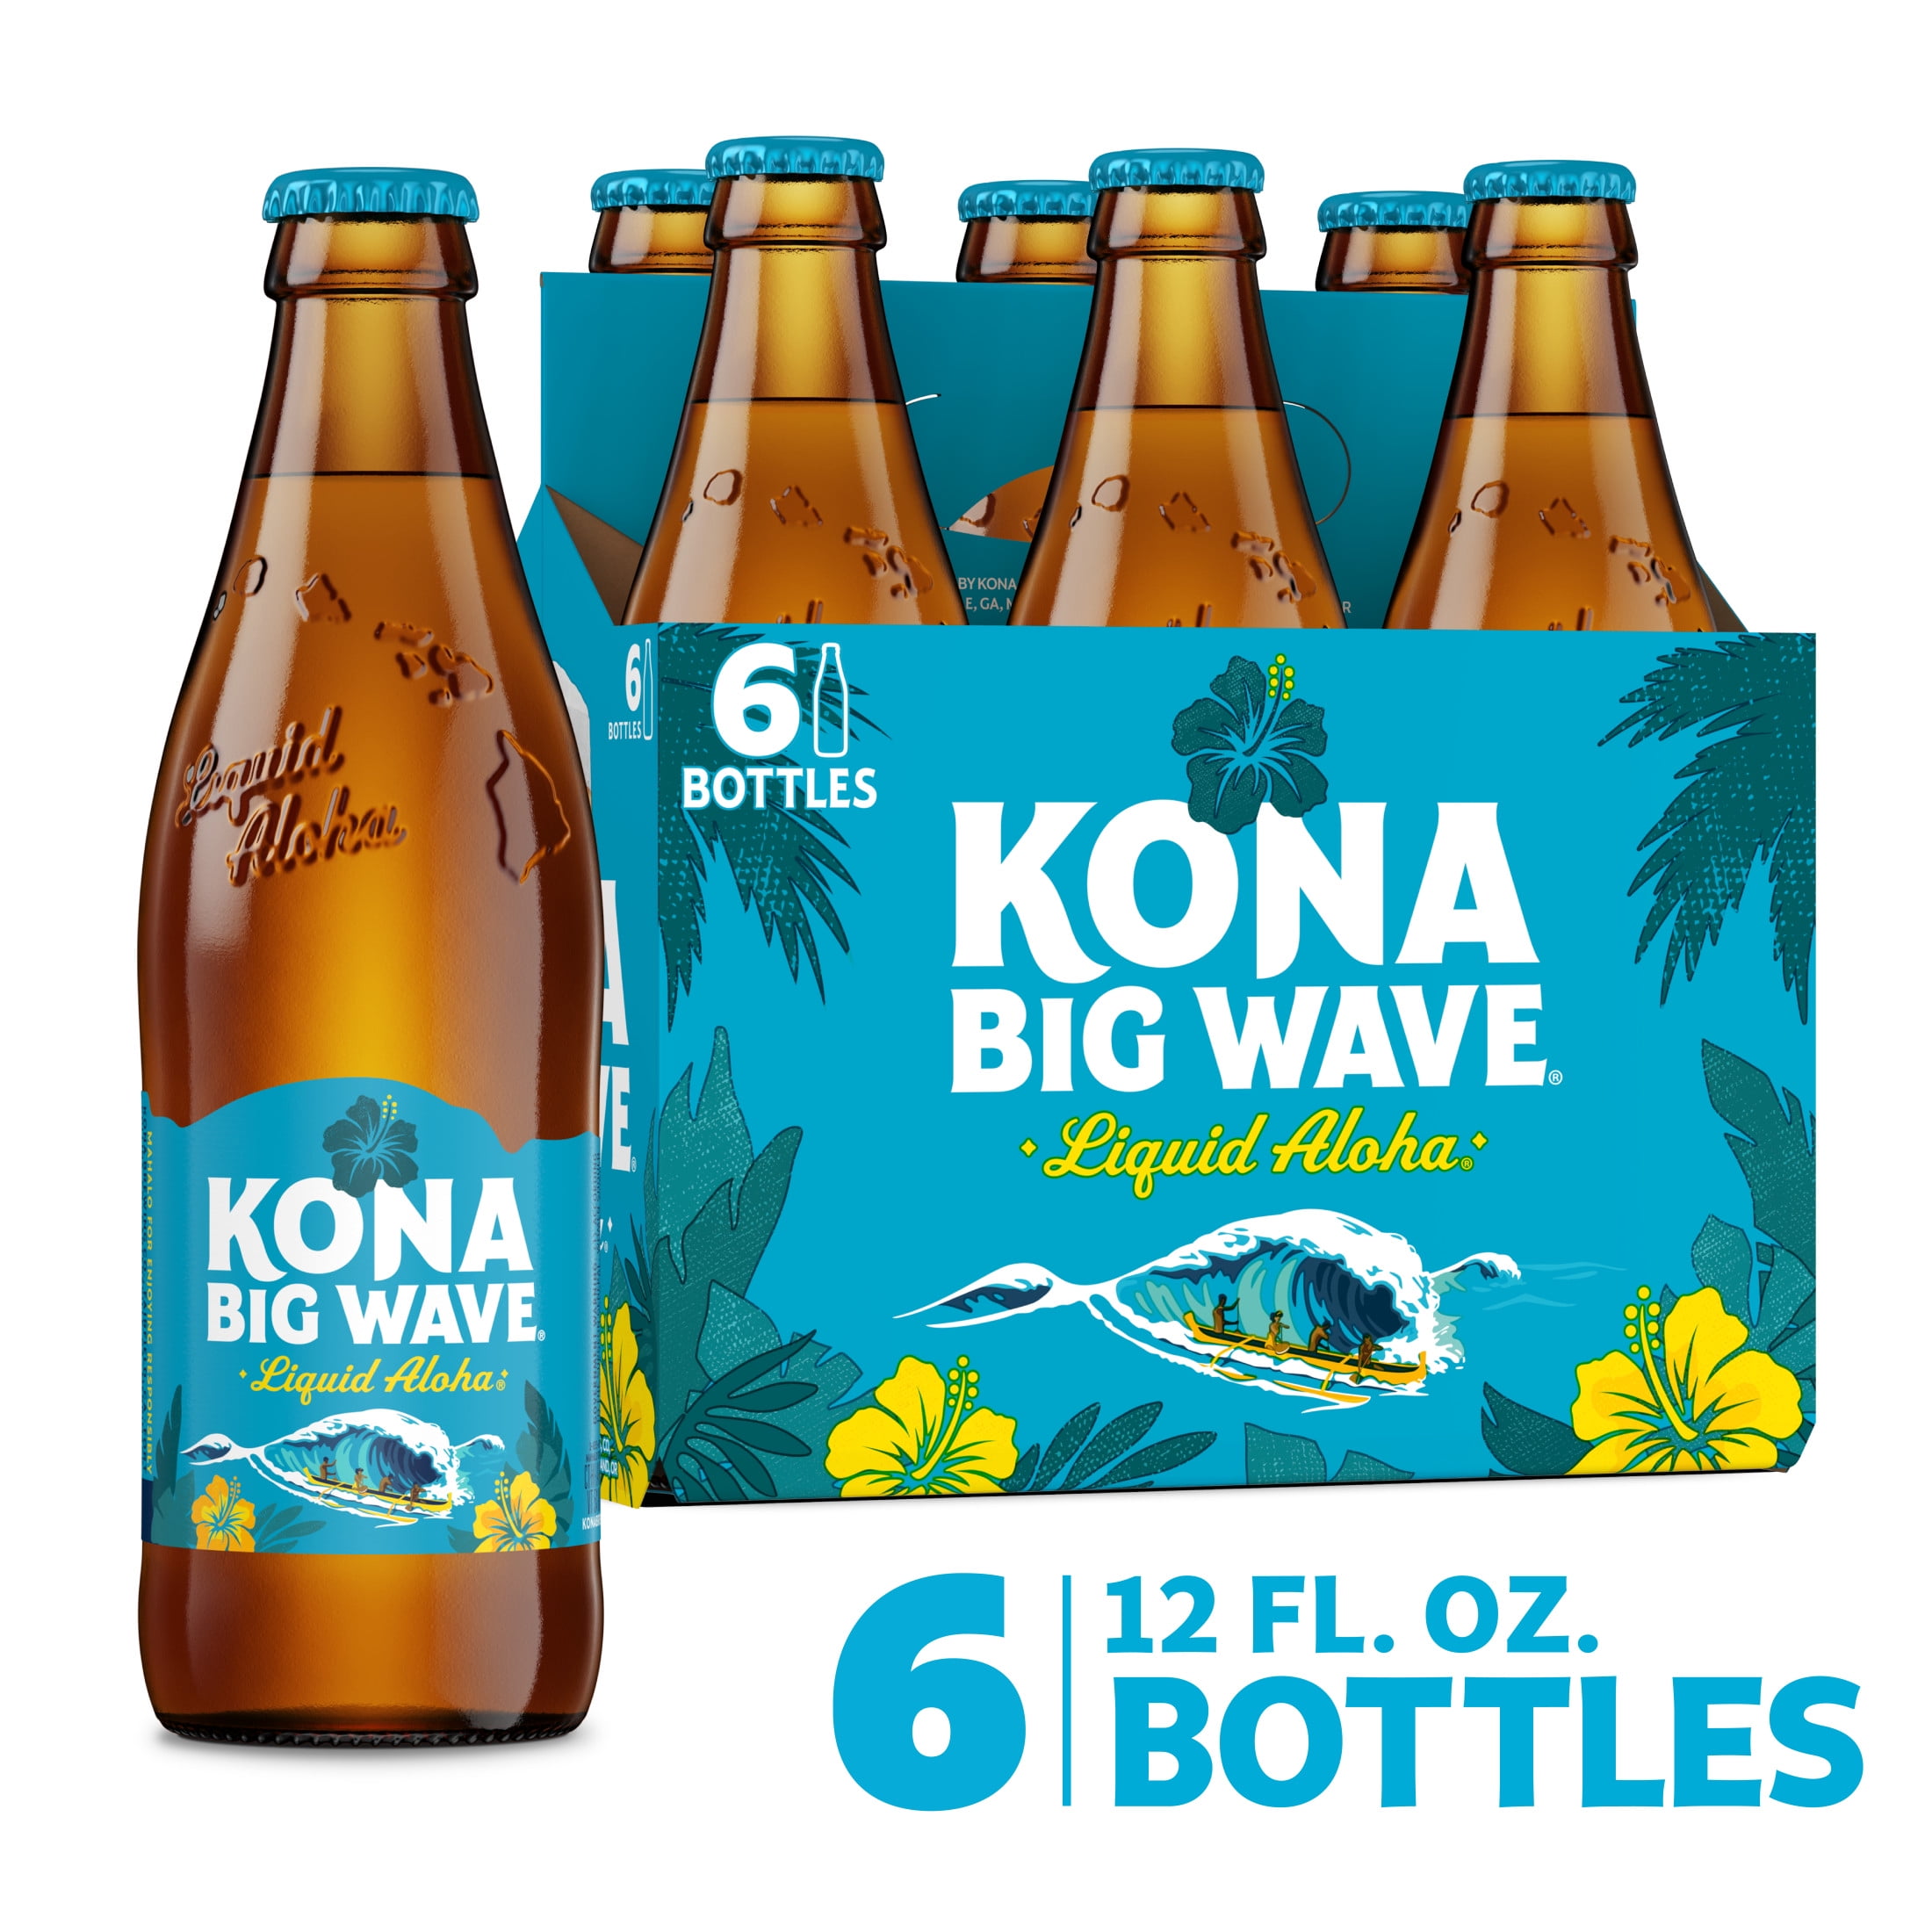 Kona Brewing Co. - Blue Planet - We are 100